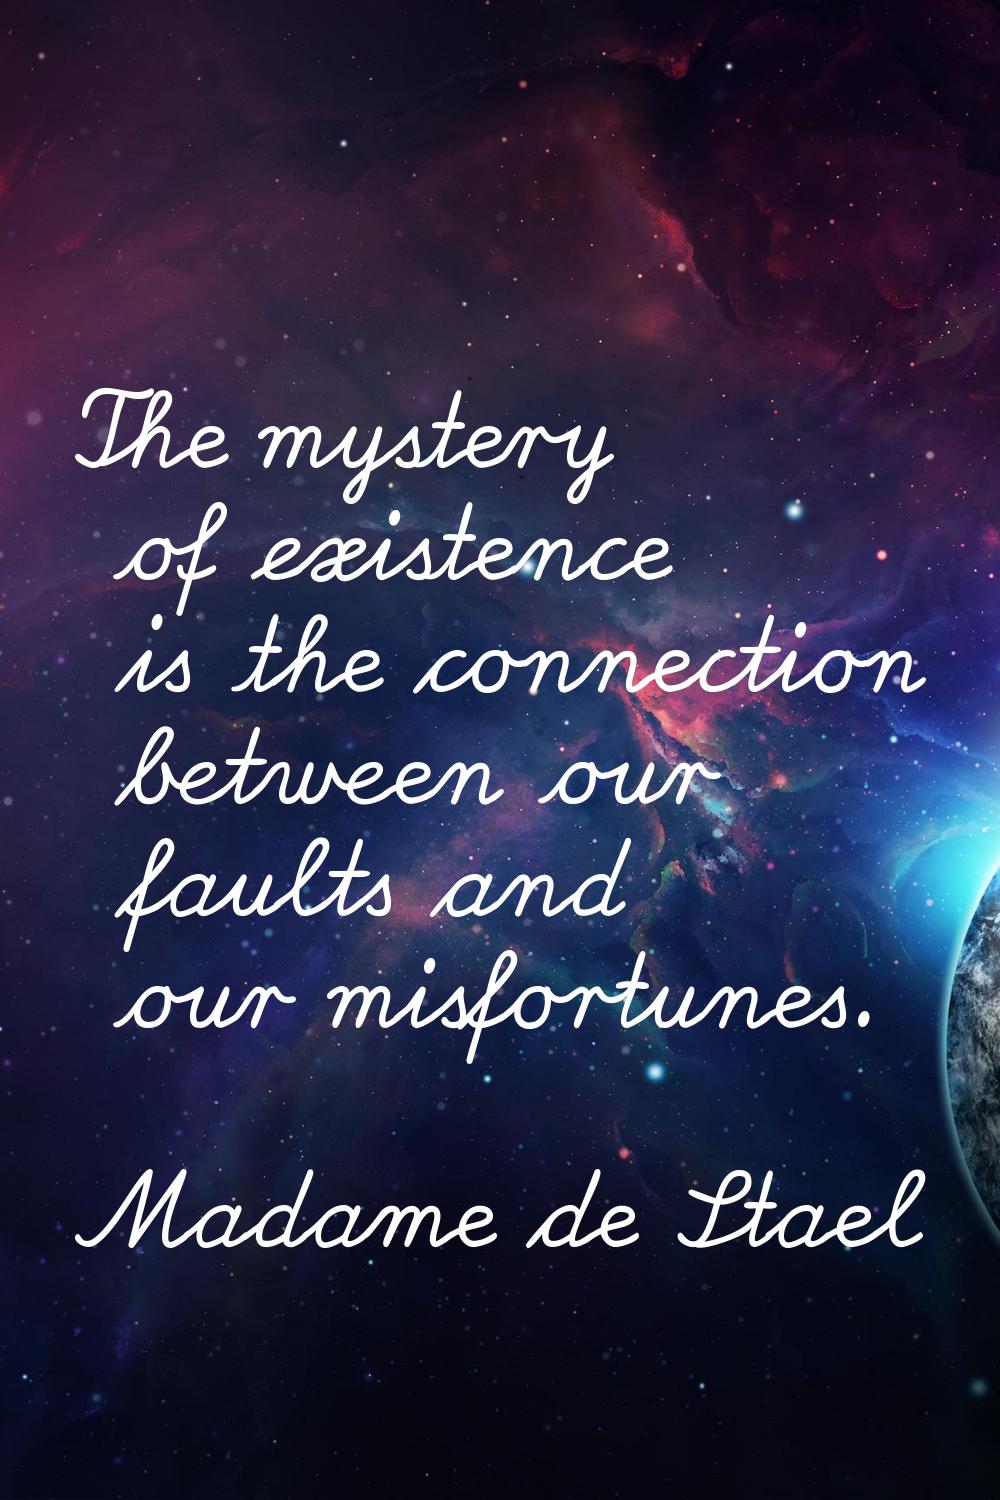 The mystery of existence is the connection between our faults and our misfortunes.